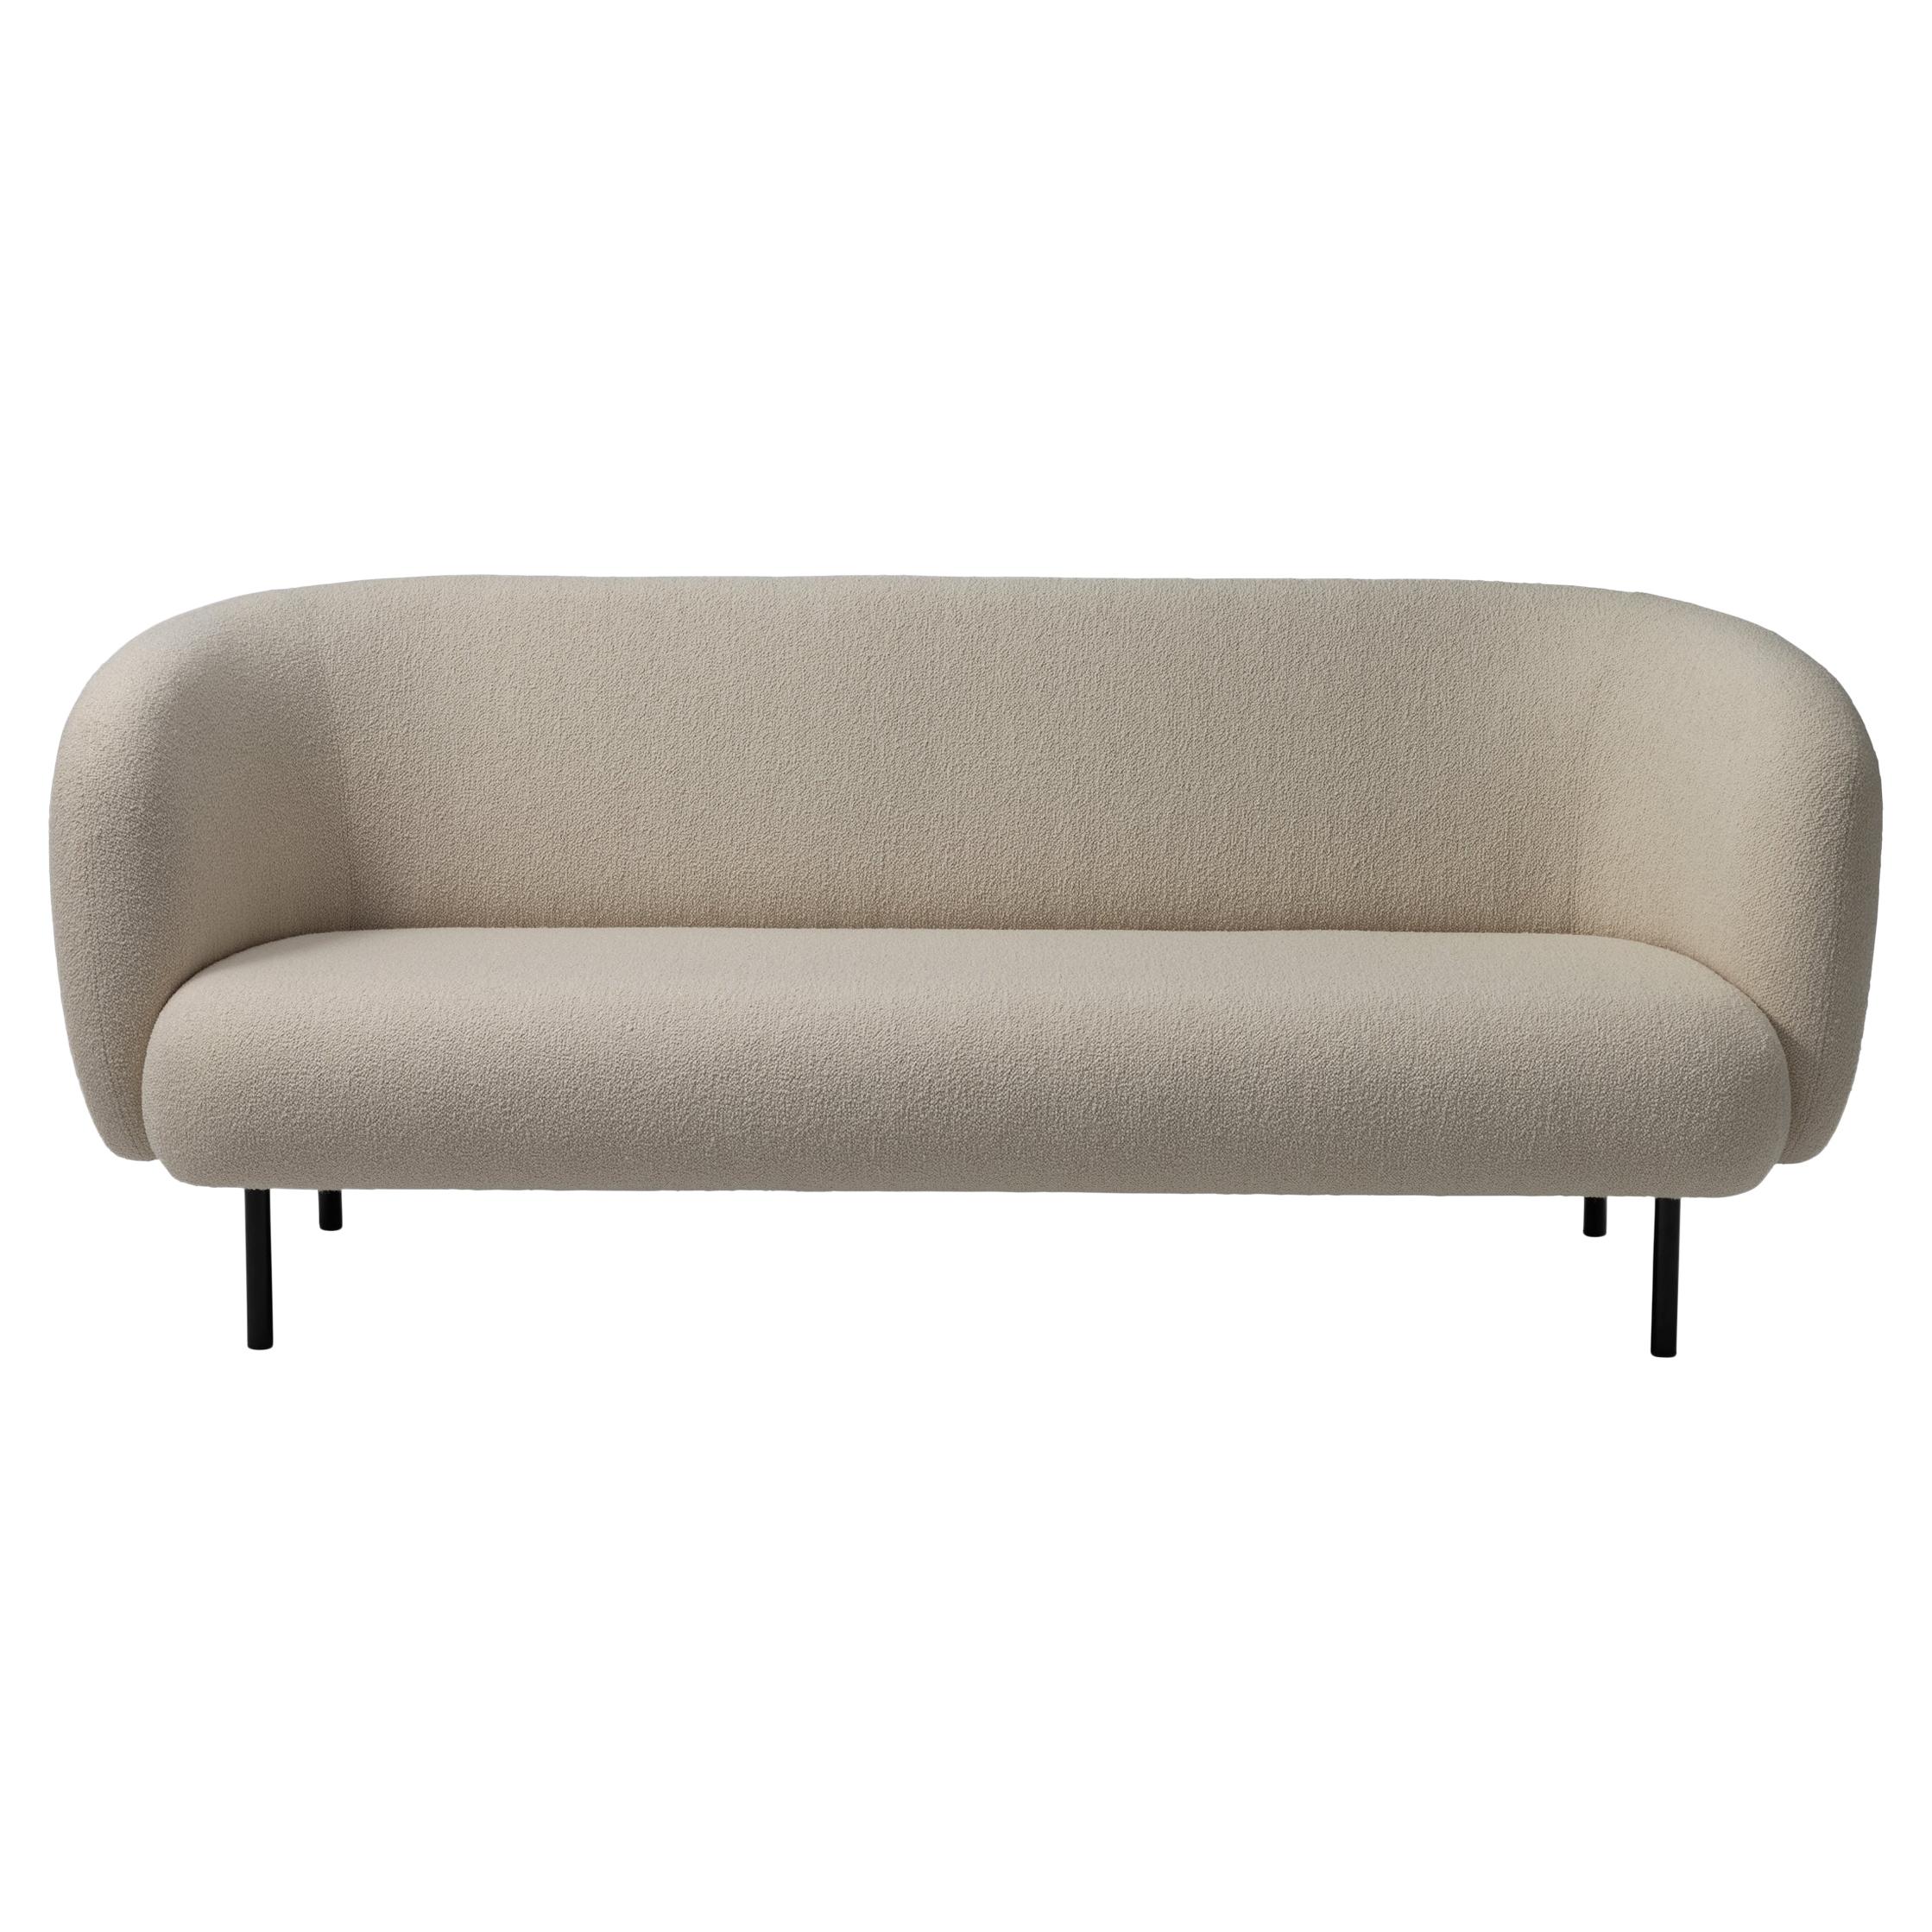 For Sale: Gray (Barnum 2) Cape 3-Seat Sofa, by Charlotte Høncke from Warm Nordic